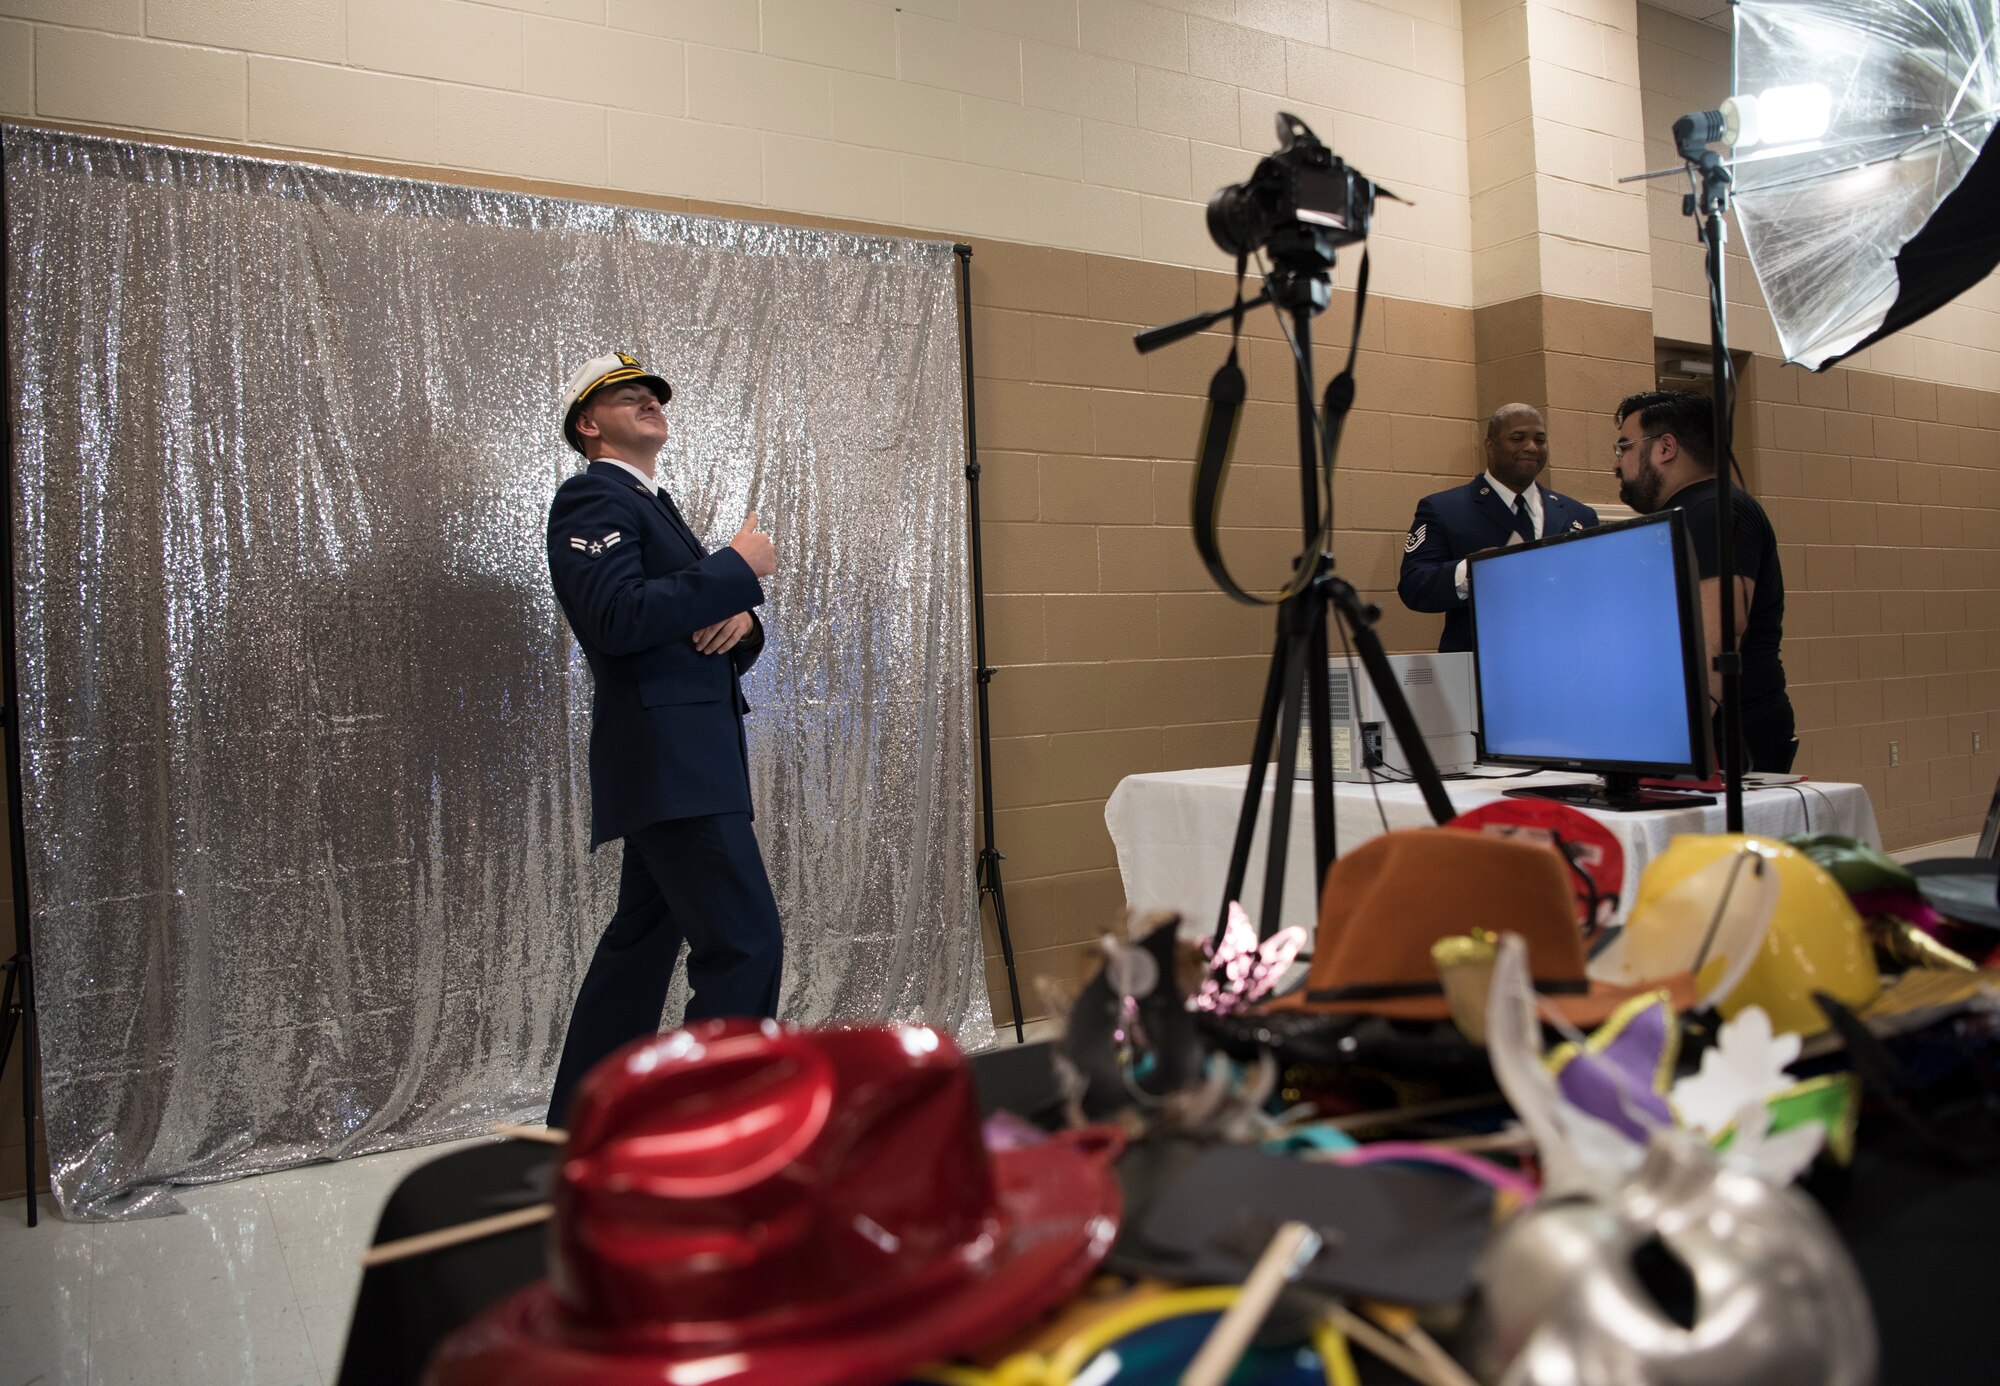 Airman 1st Class Justin Welch, 47th Flying Training Wing Command Post emergency actions controller, strikes a pose at the photo booth at Laughlin’s Air Force Ball in Del Rio, Texas, Sept. 13, 2019. Laughlin’s Air Force Ball was in celebration of celebrate the Air Force’s 72nd birthday, as well as the 47th year as the 47th FTW. (U.S. Air Force photo by Staff Sgt. Benjamin N. Valmoja)